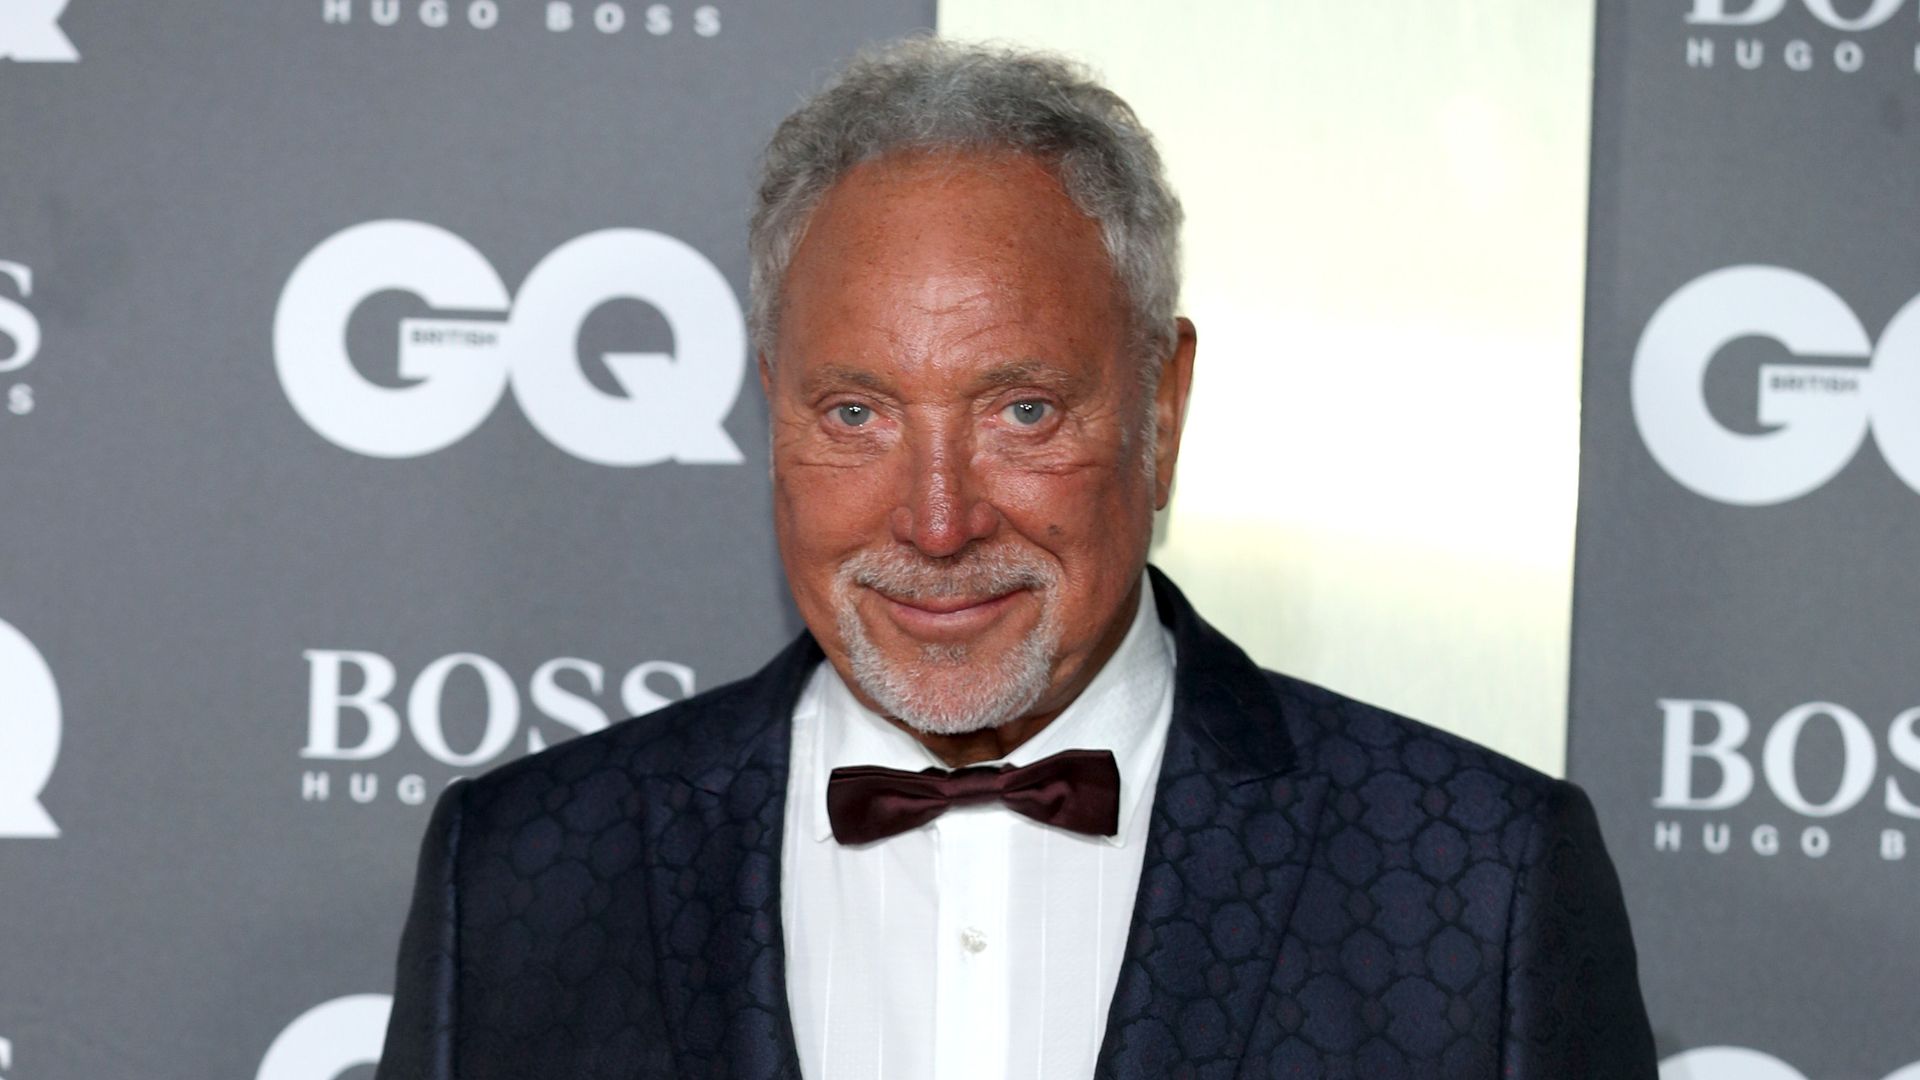 Sir Tom Jones admits his 'voice has changed' as he embarks on demanding world tour